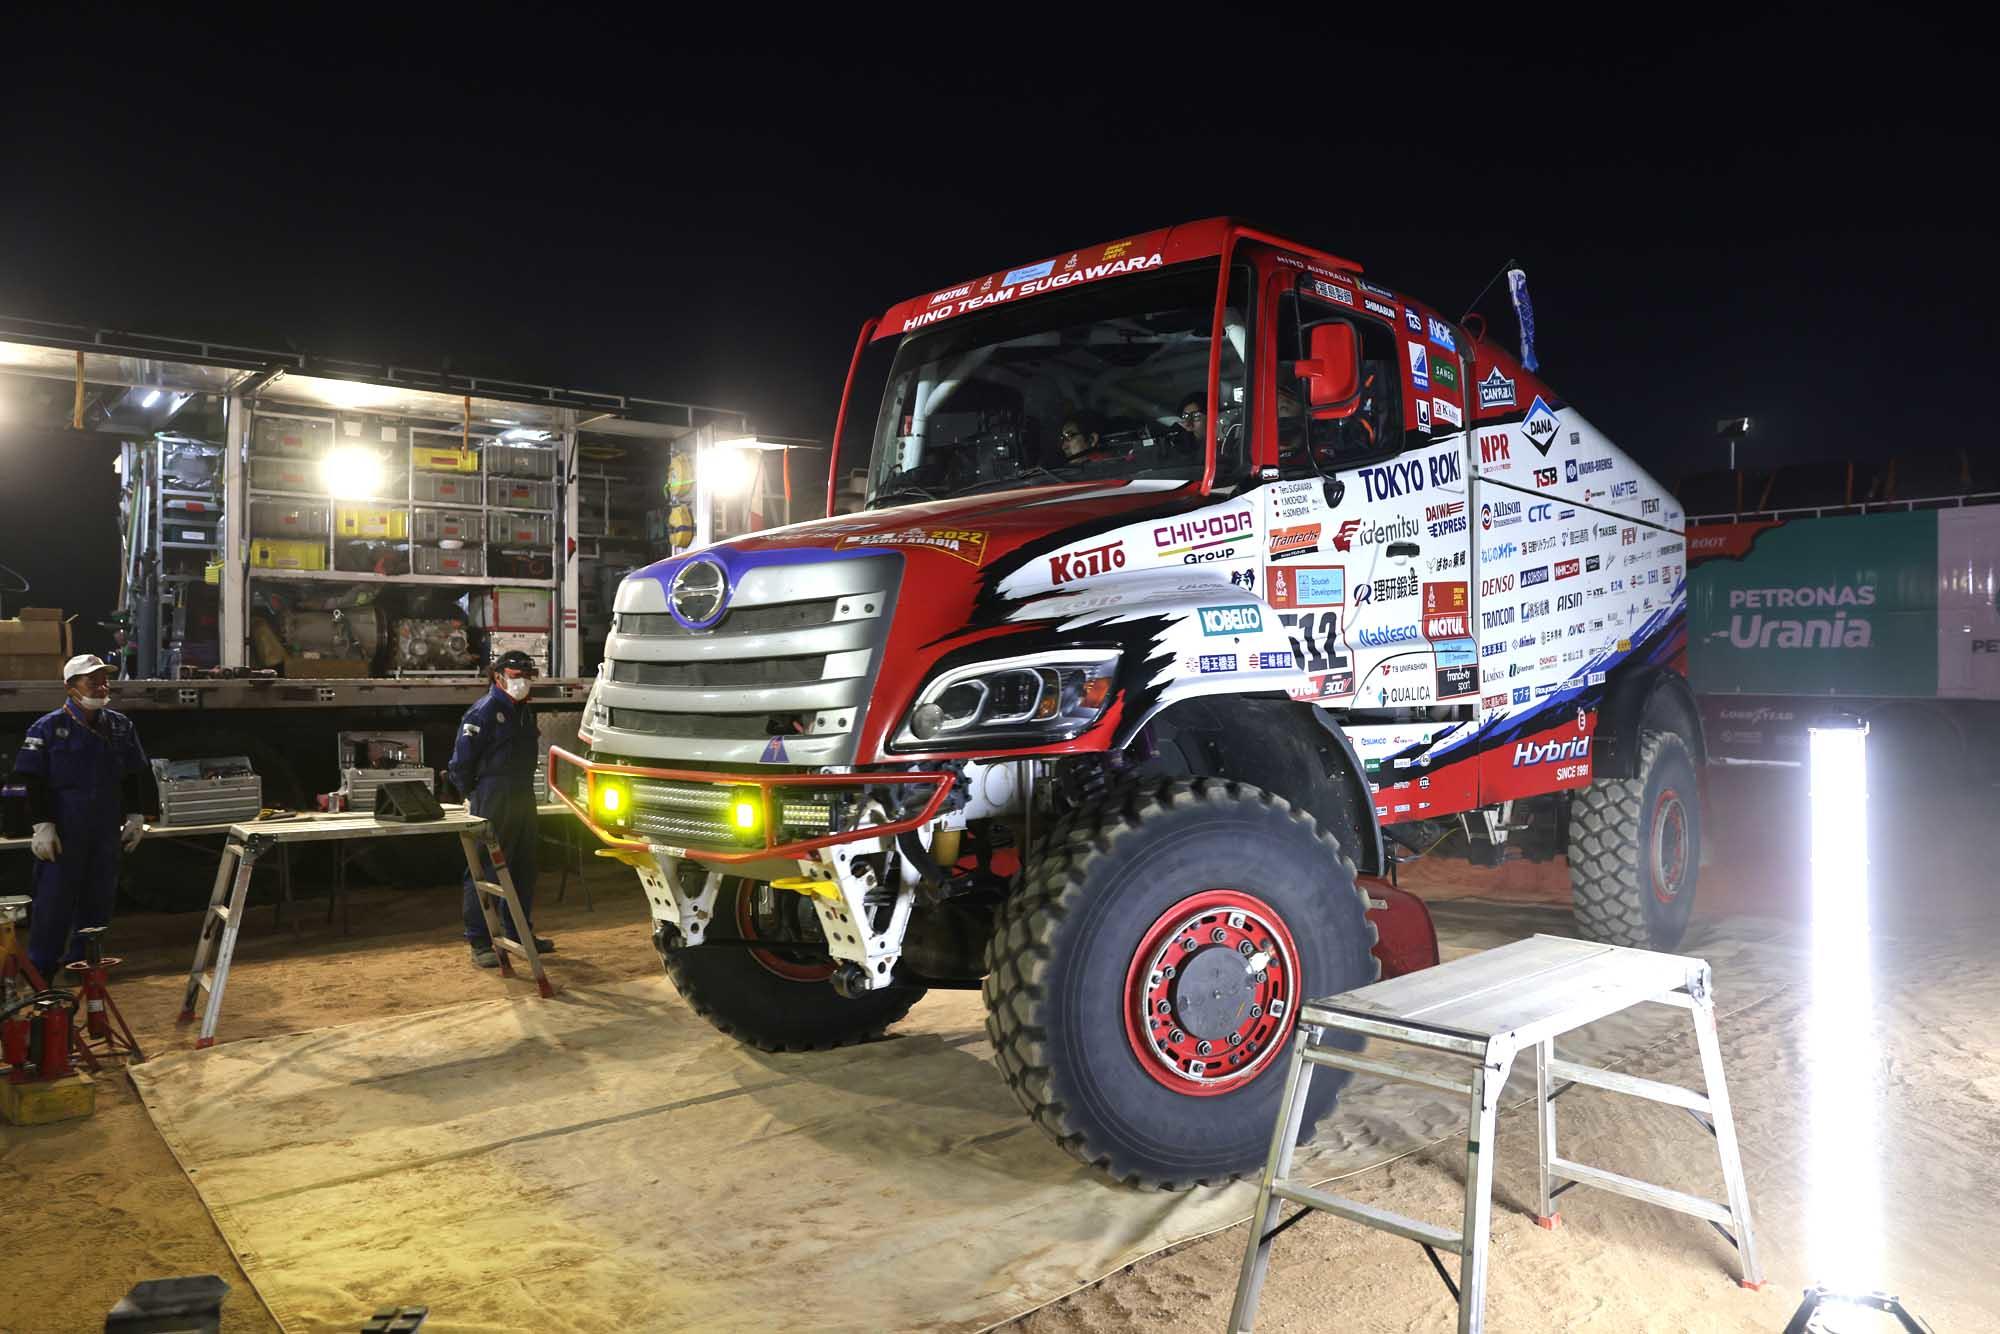 Stage7：First top 10 finish on the first day of the second half of the season. Finished 10th overall in the Trucks category on a high-speed stage with soft sand.